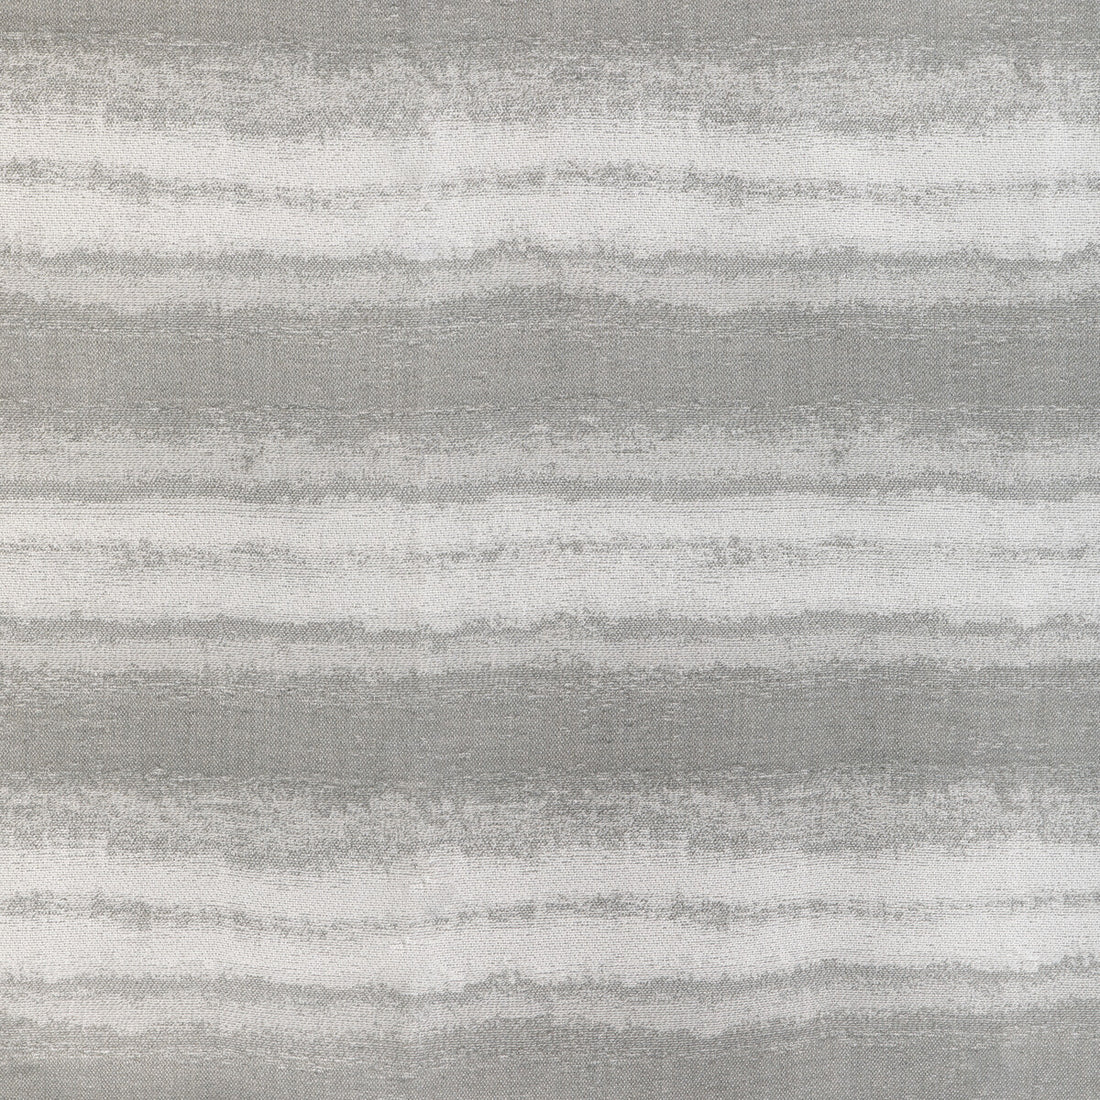 Riverwalk fabric in driftwood color - pattern 36932.11.0 - by Kravet Couture in the Riviera collection